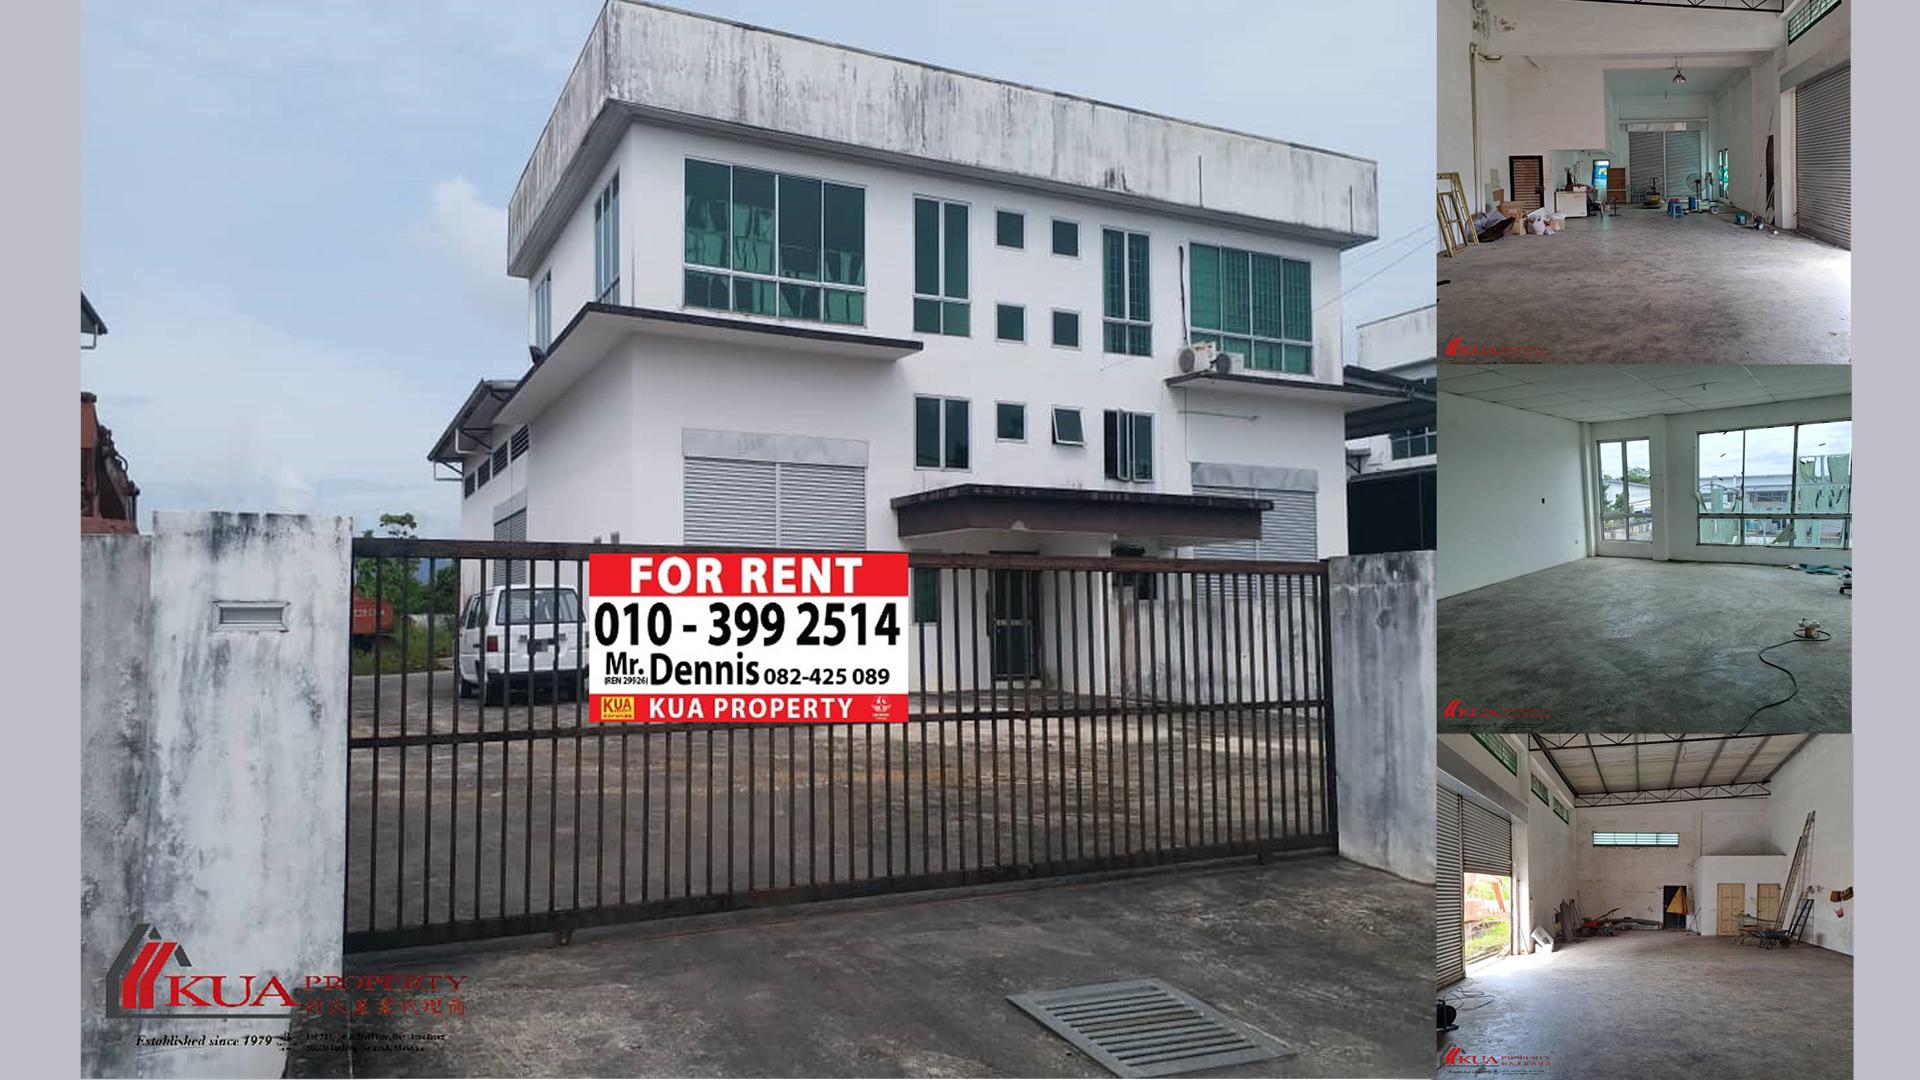 Double Storey Semi-Detached Factory/Warehouse FOR RENT! Located at Batu Kitang